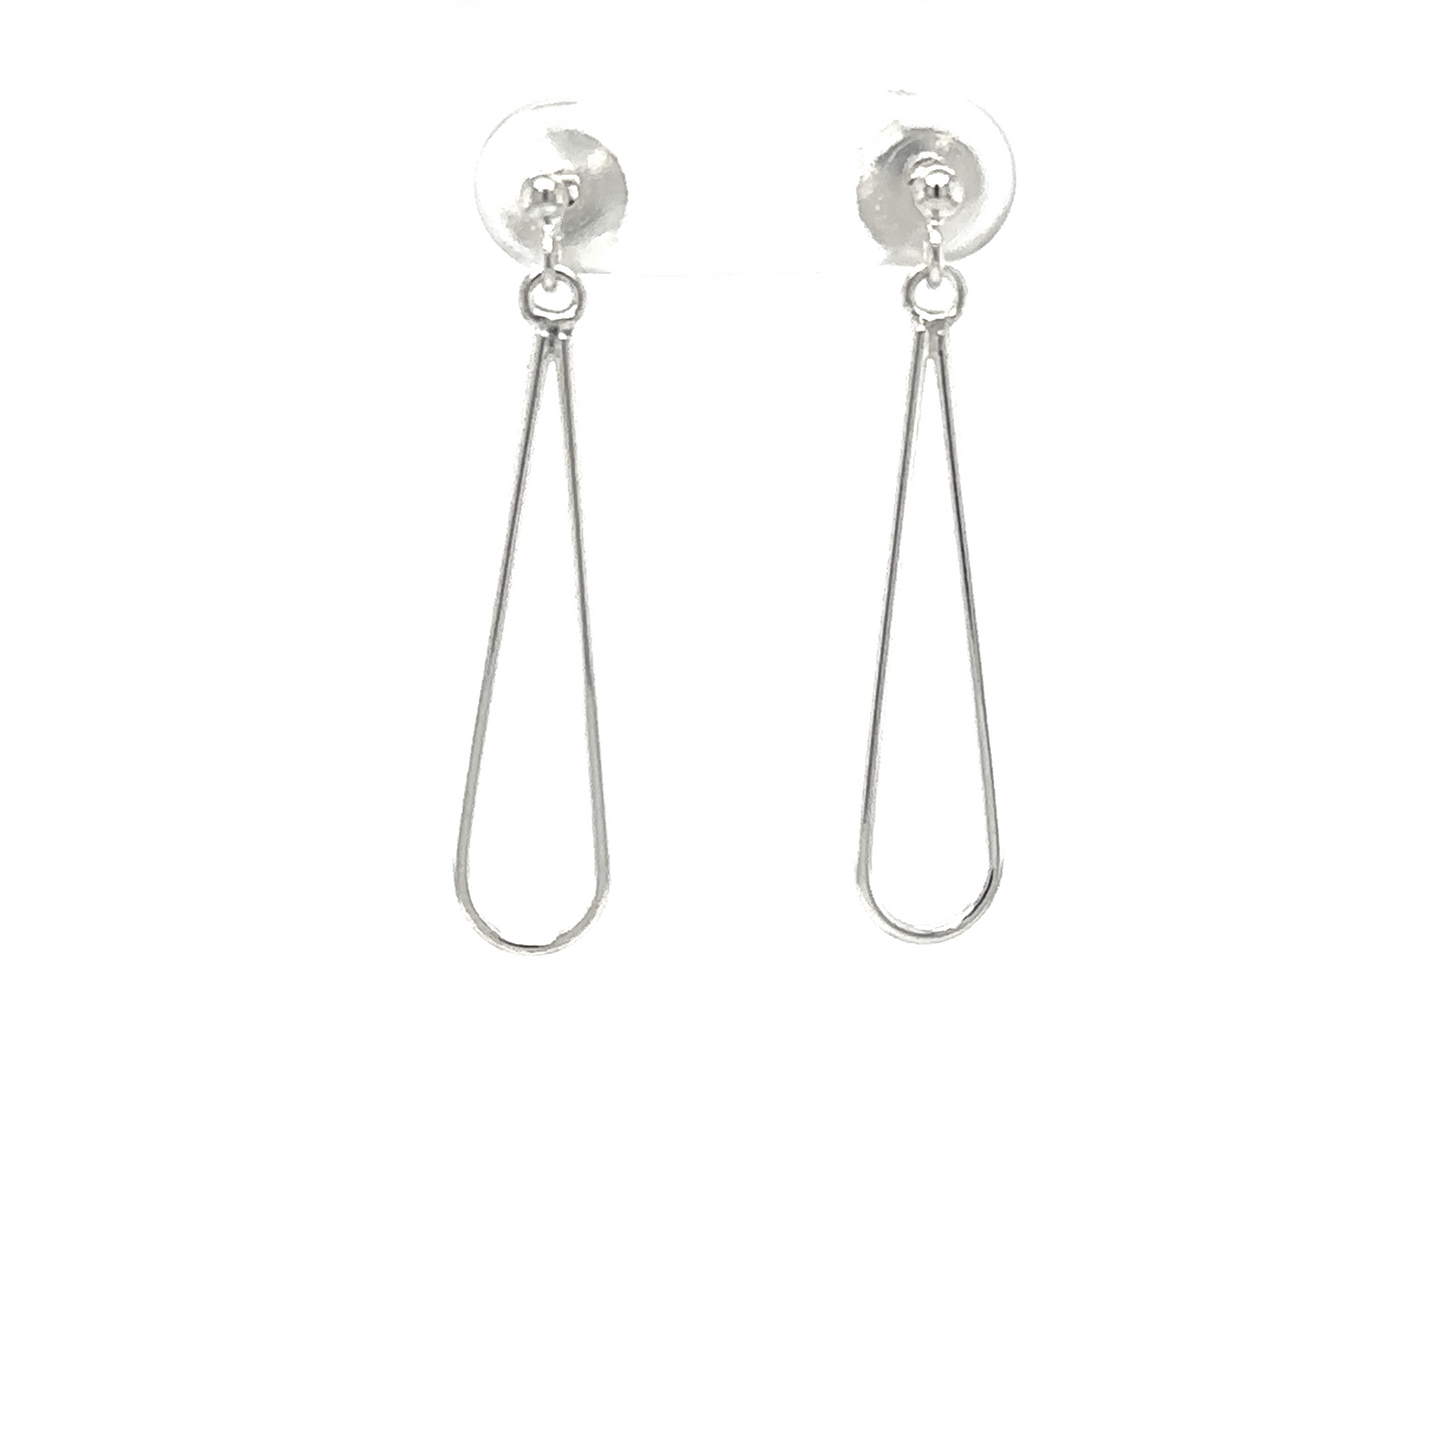 A pair of lightweight Super Silver Open Teardrop Post Earrings on a white background.